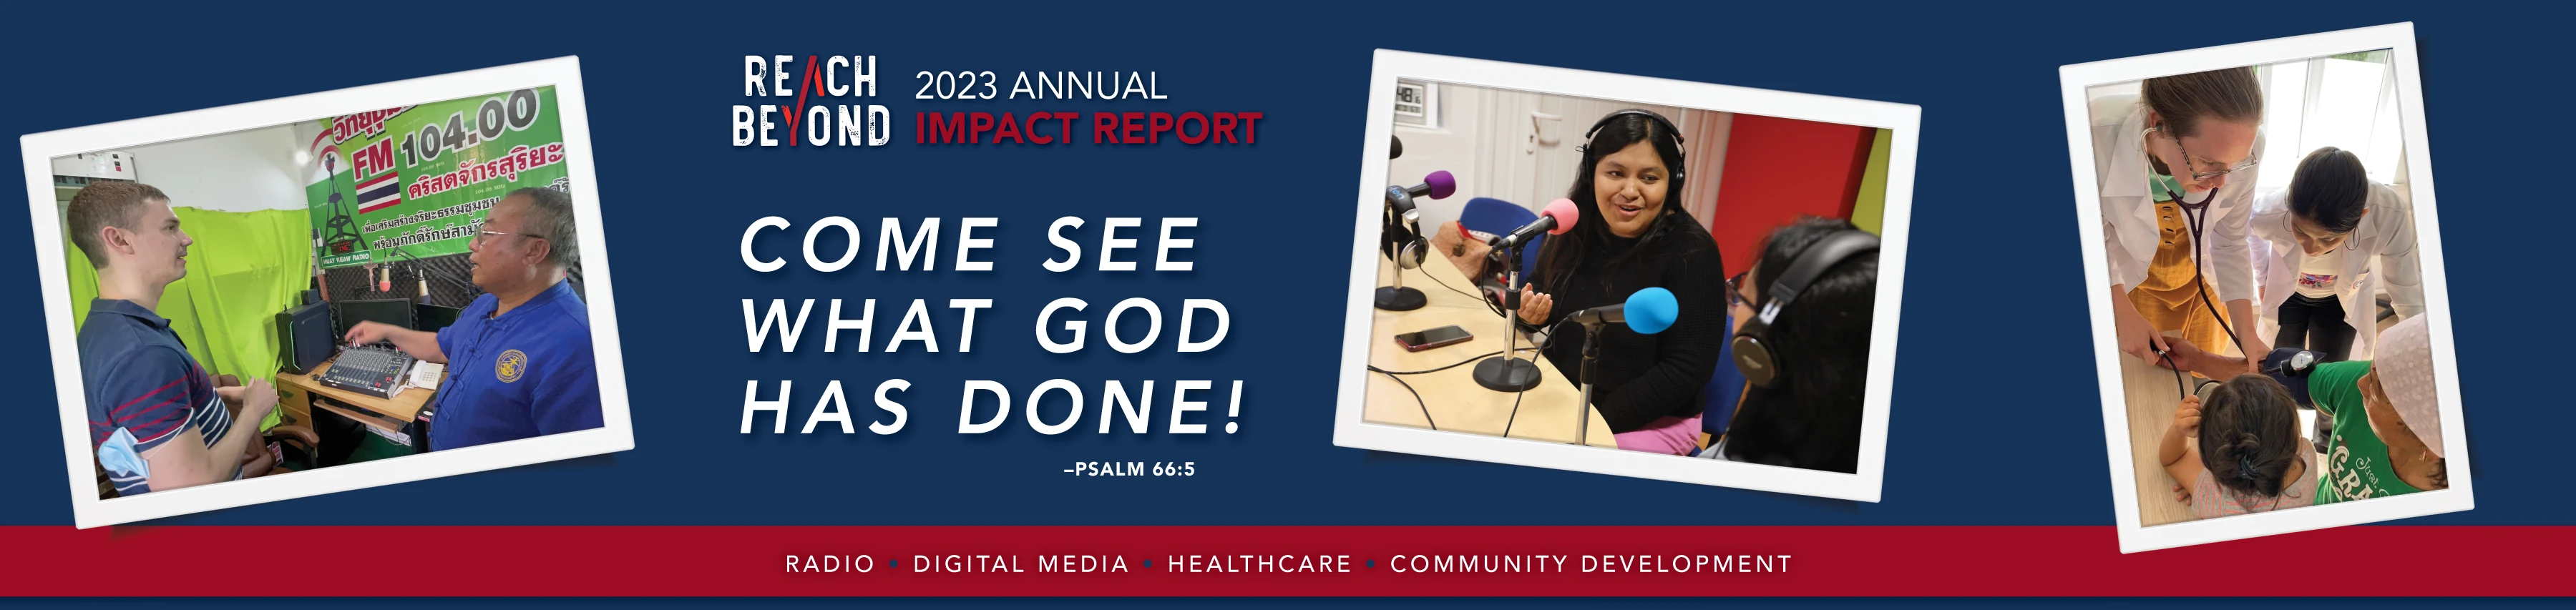 2023 Annual Impact Report Banner